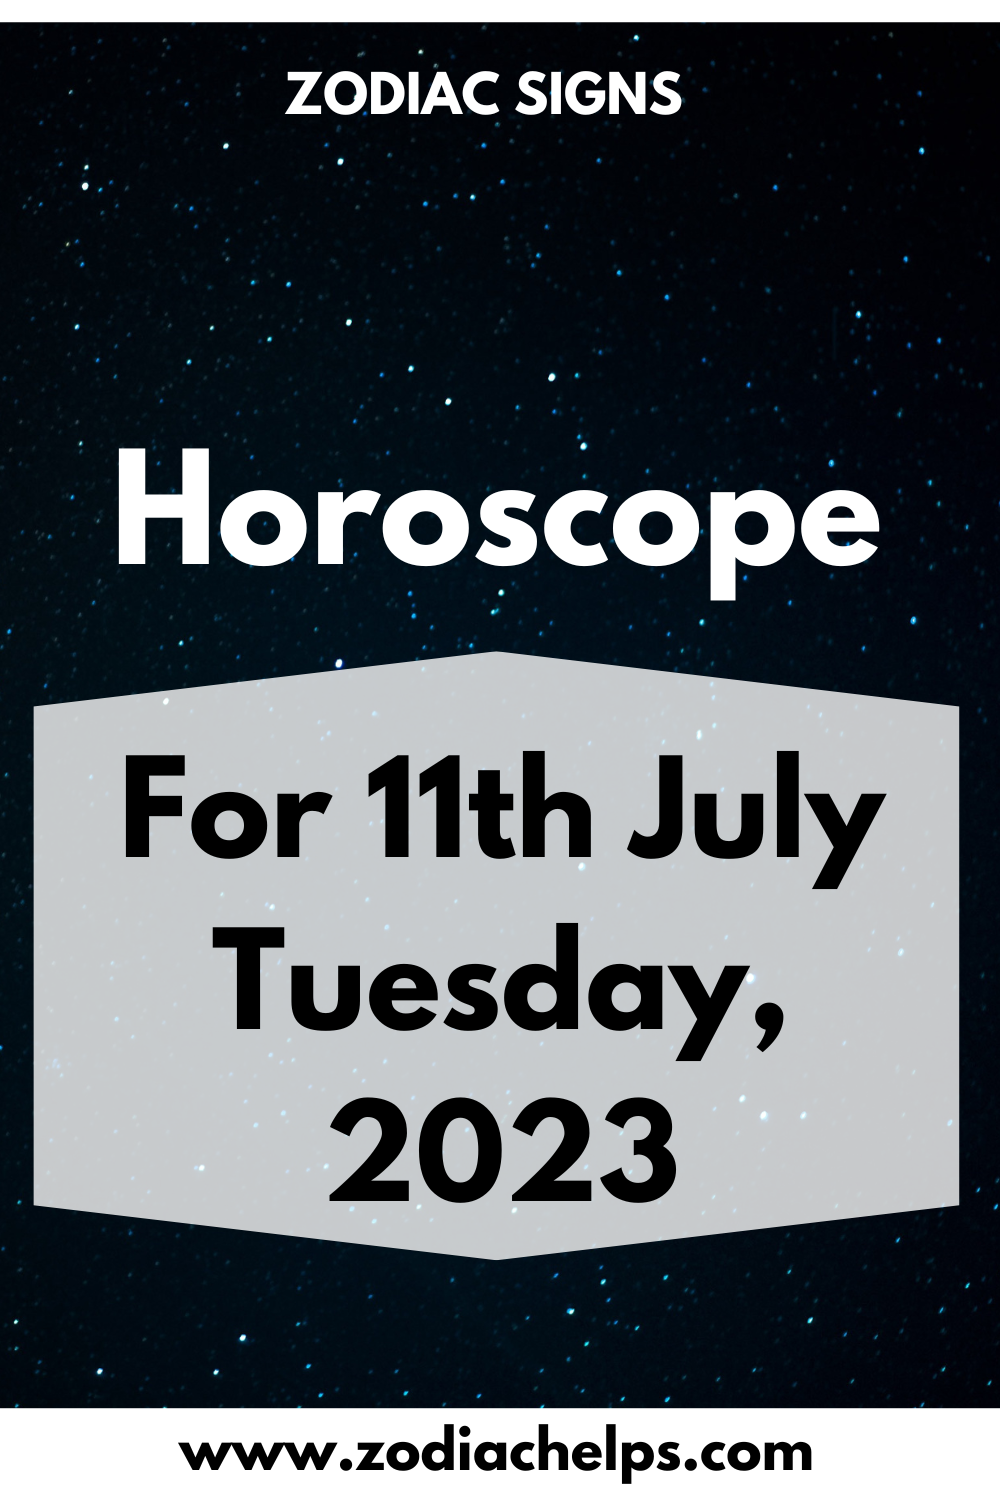 Horoscope for 11th July Tuesday, 2023